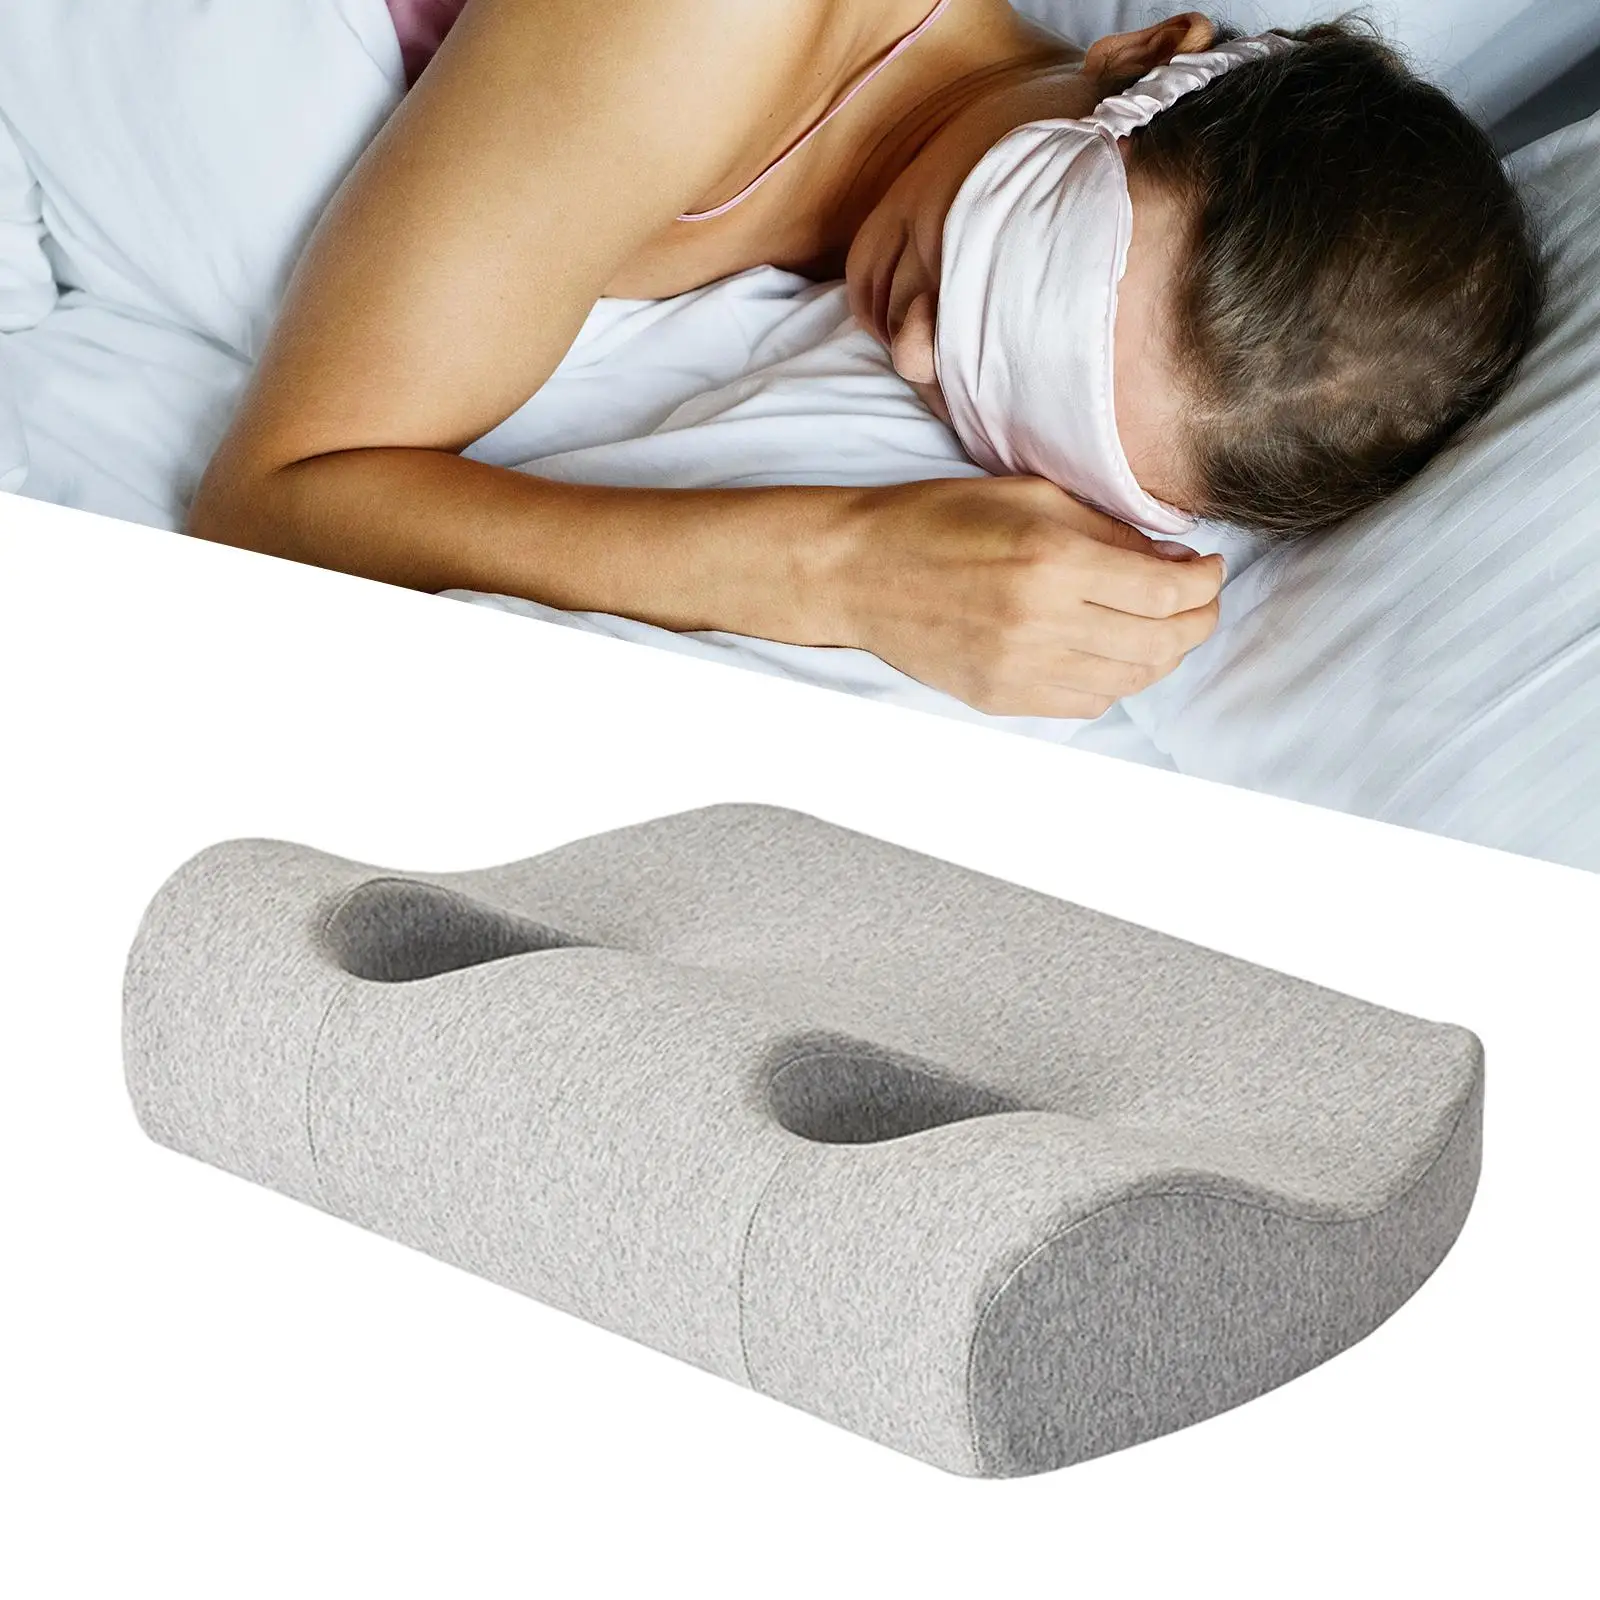 Ear Pillows with Hole Ergonomic Pillow Breathable Pillow with Ear Hole for Headphones All Sleeping Positions Ear Pain Earbuds